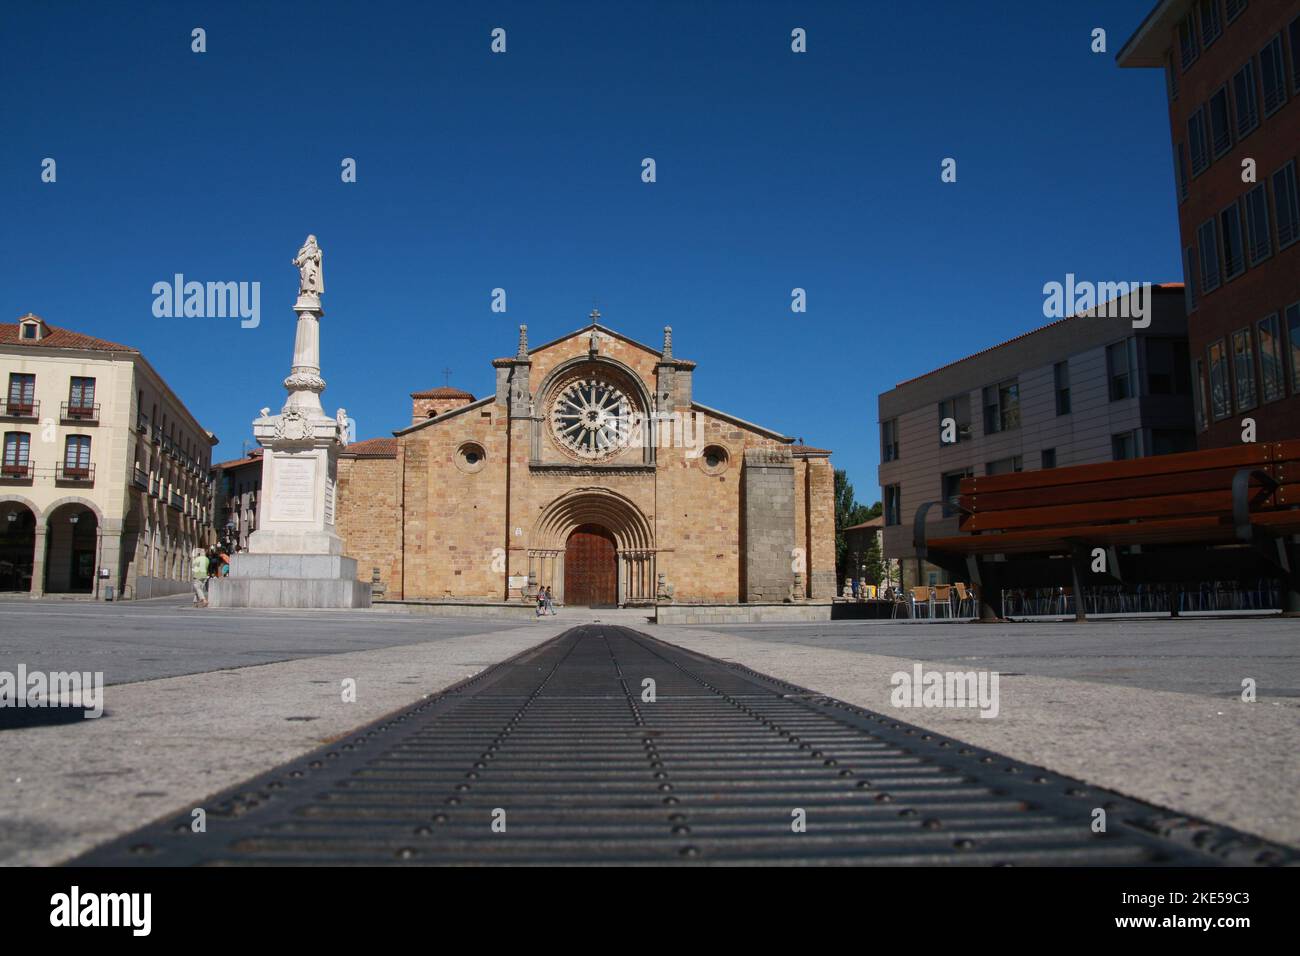 A low angle of the church parish of St. Peter the Apostle with Romanesque architecture in Avila, Spain Stock Photo